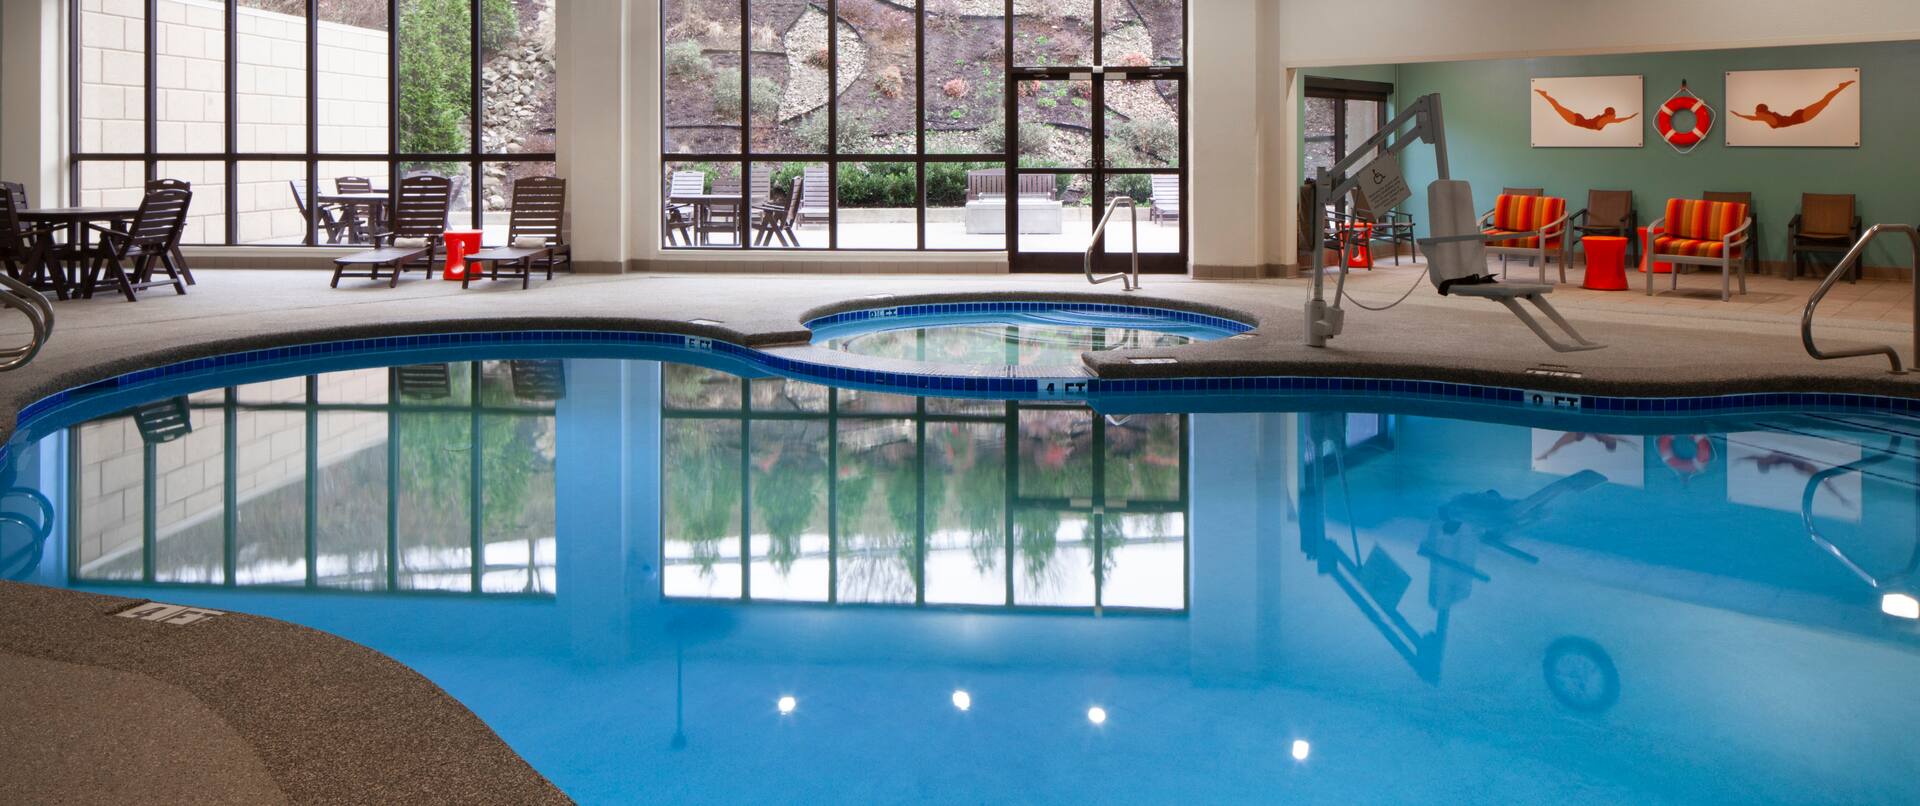 Indoor Pool With Hot Tub